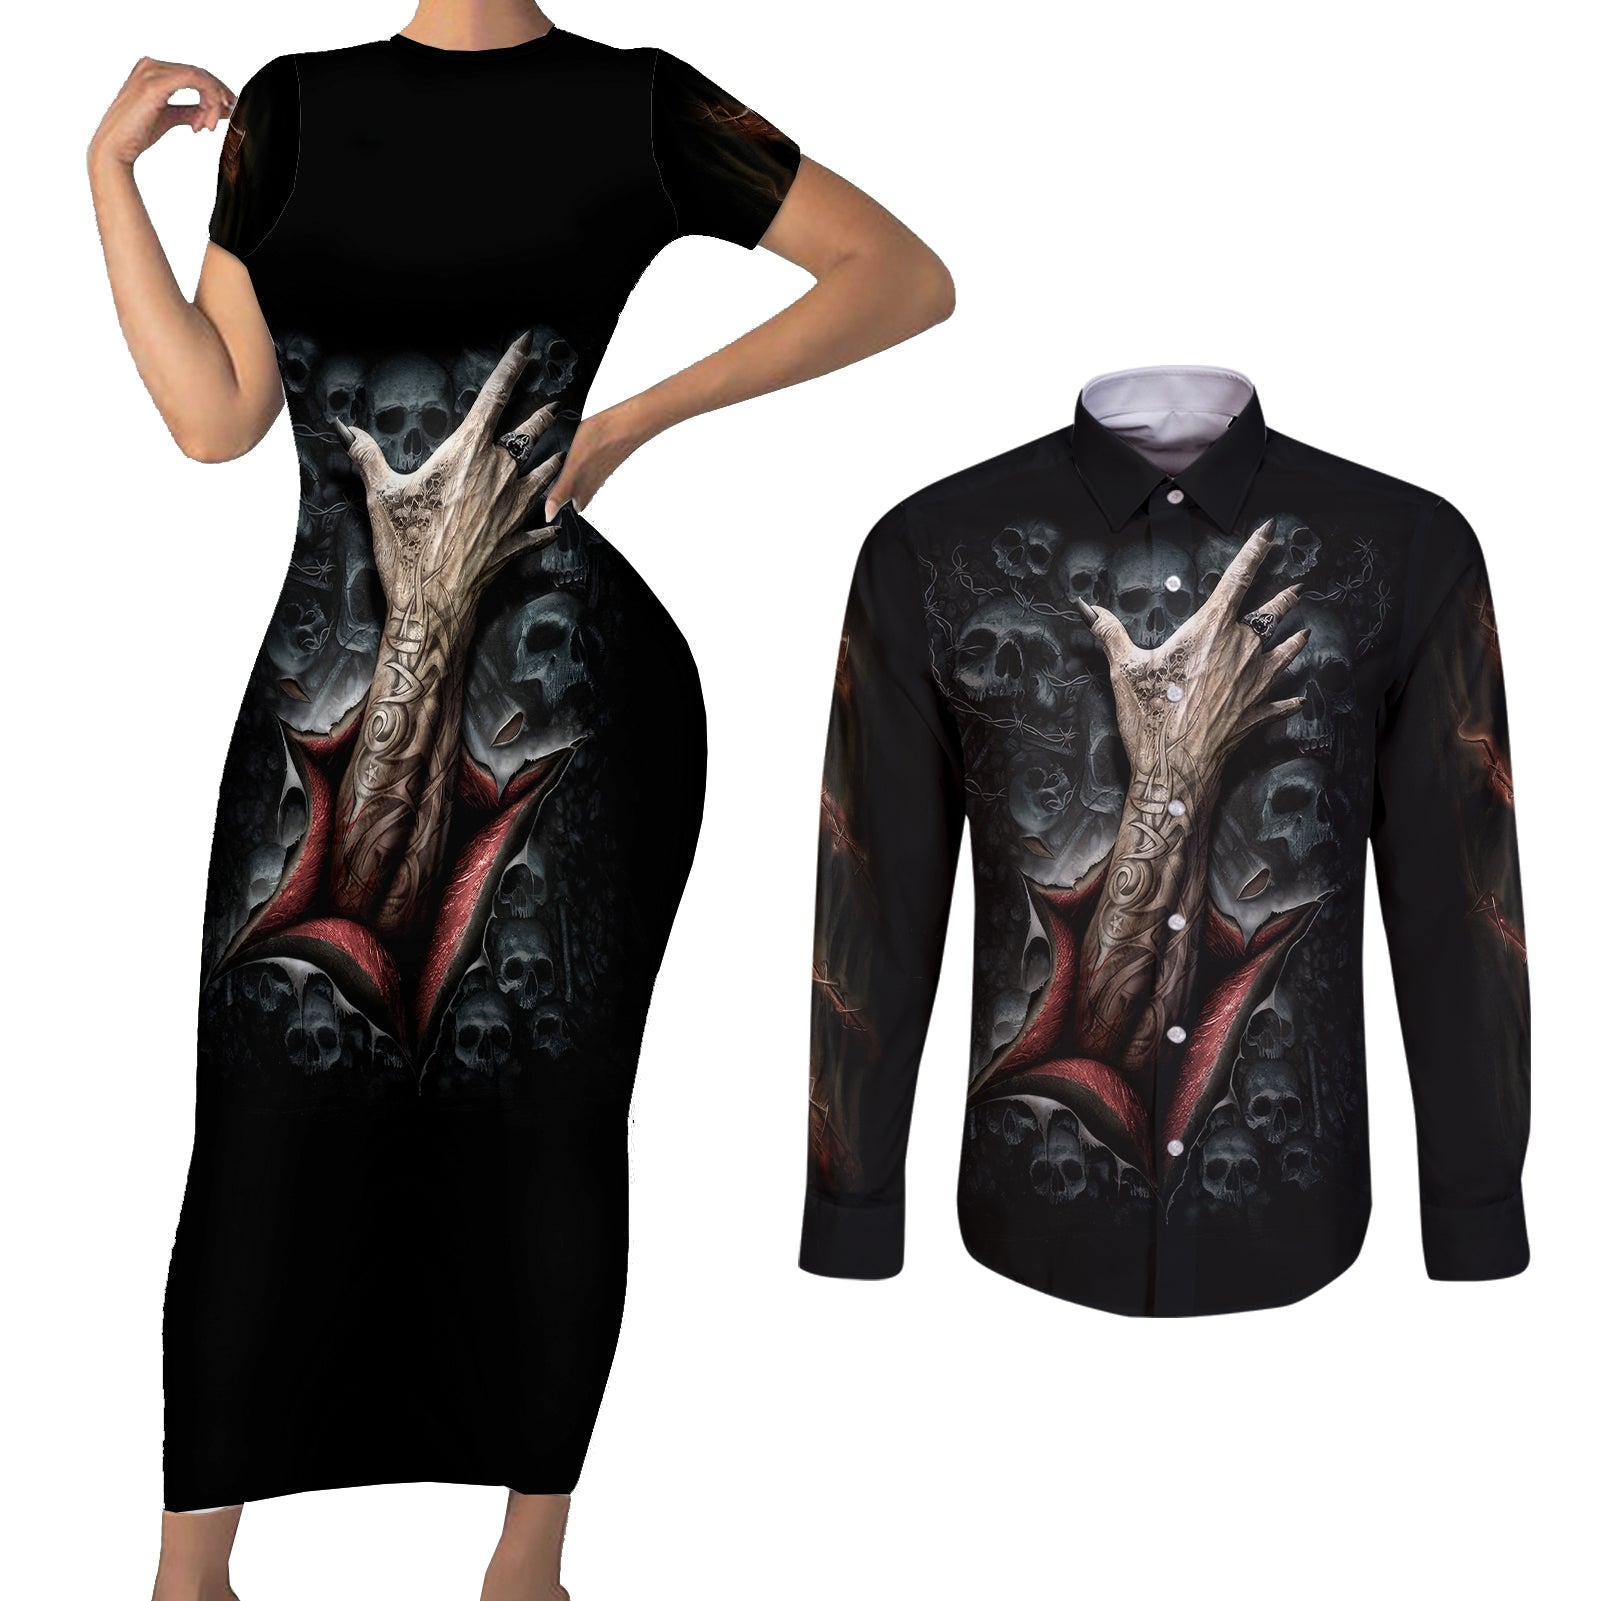 skull-couples-matching-short-sleeve-bodycon-dress-and-long-sleeve-button-shirts-skeleton-ripped-inside